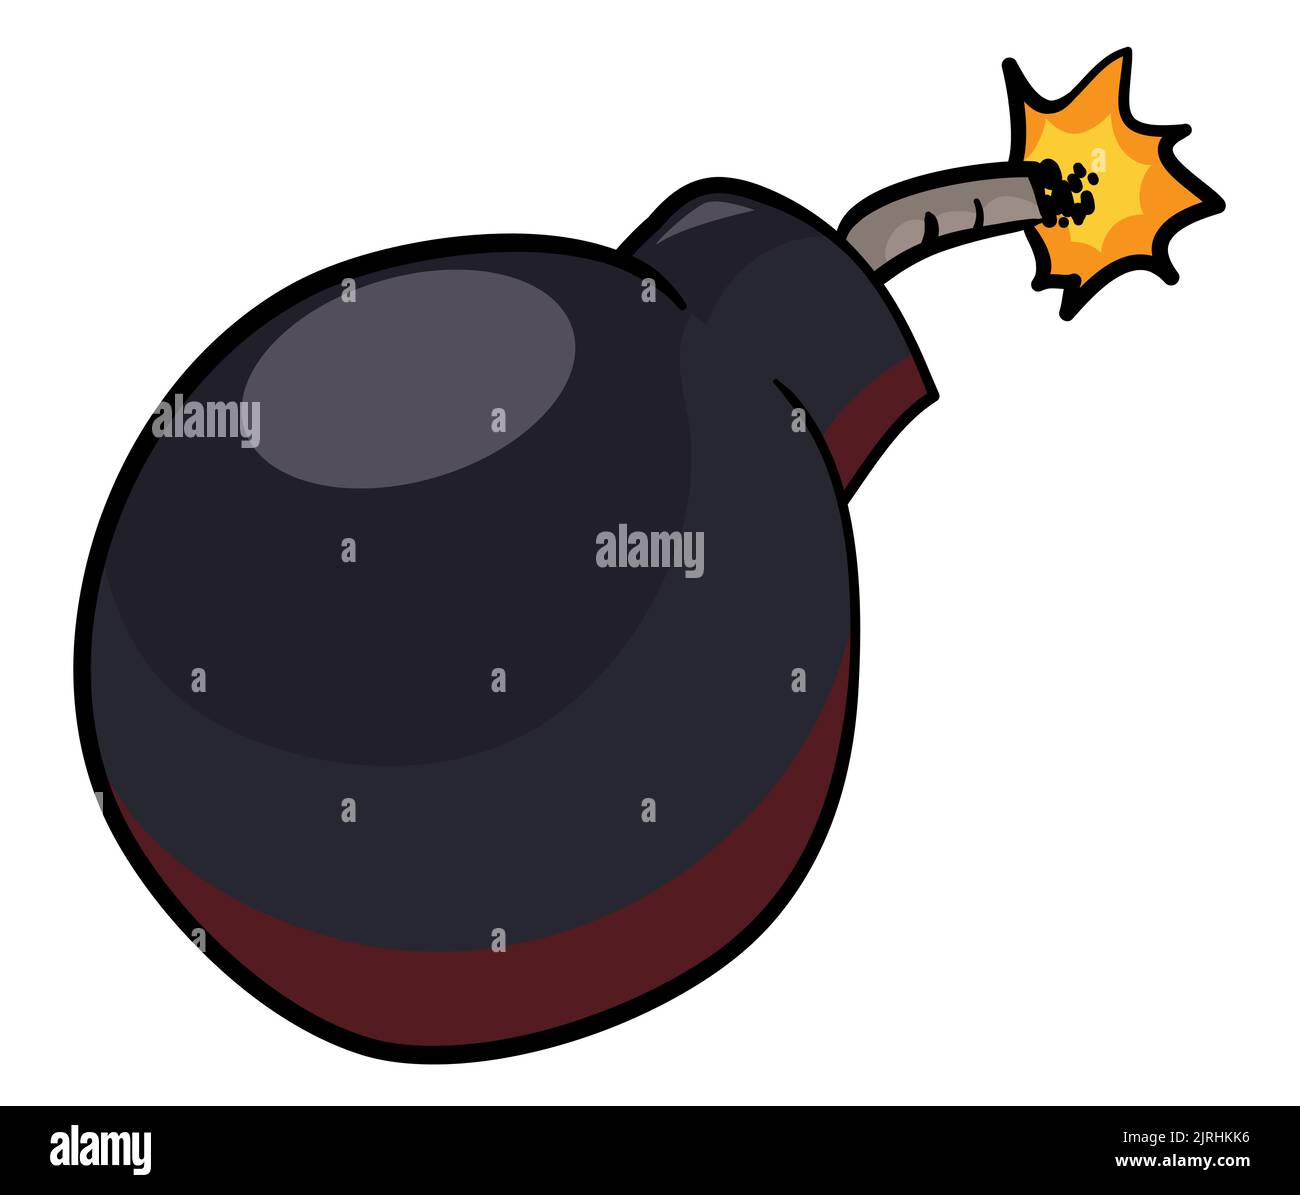 View of powerful ignited bomb, with bomb fuse running out and ready to explode. Stock Vector